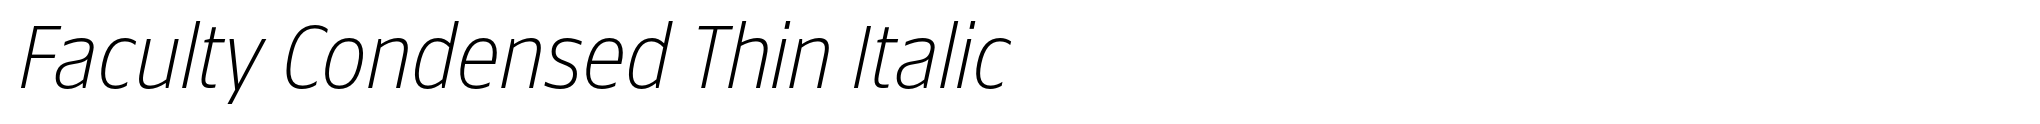 Faculty Condensed Thin Italic image